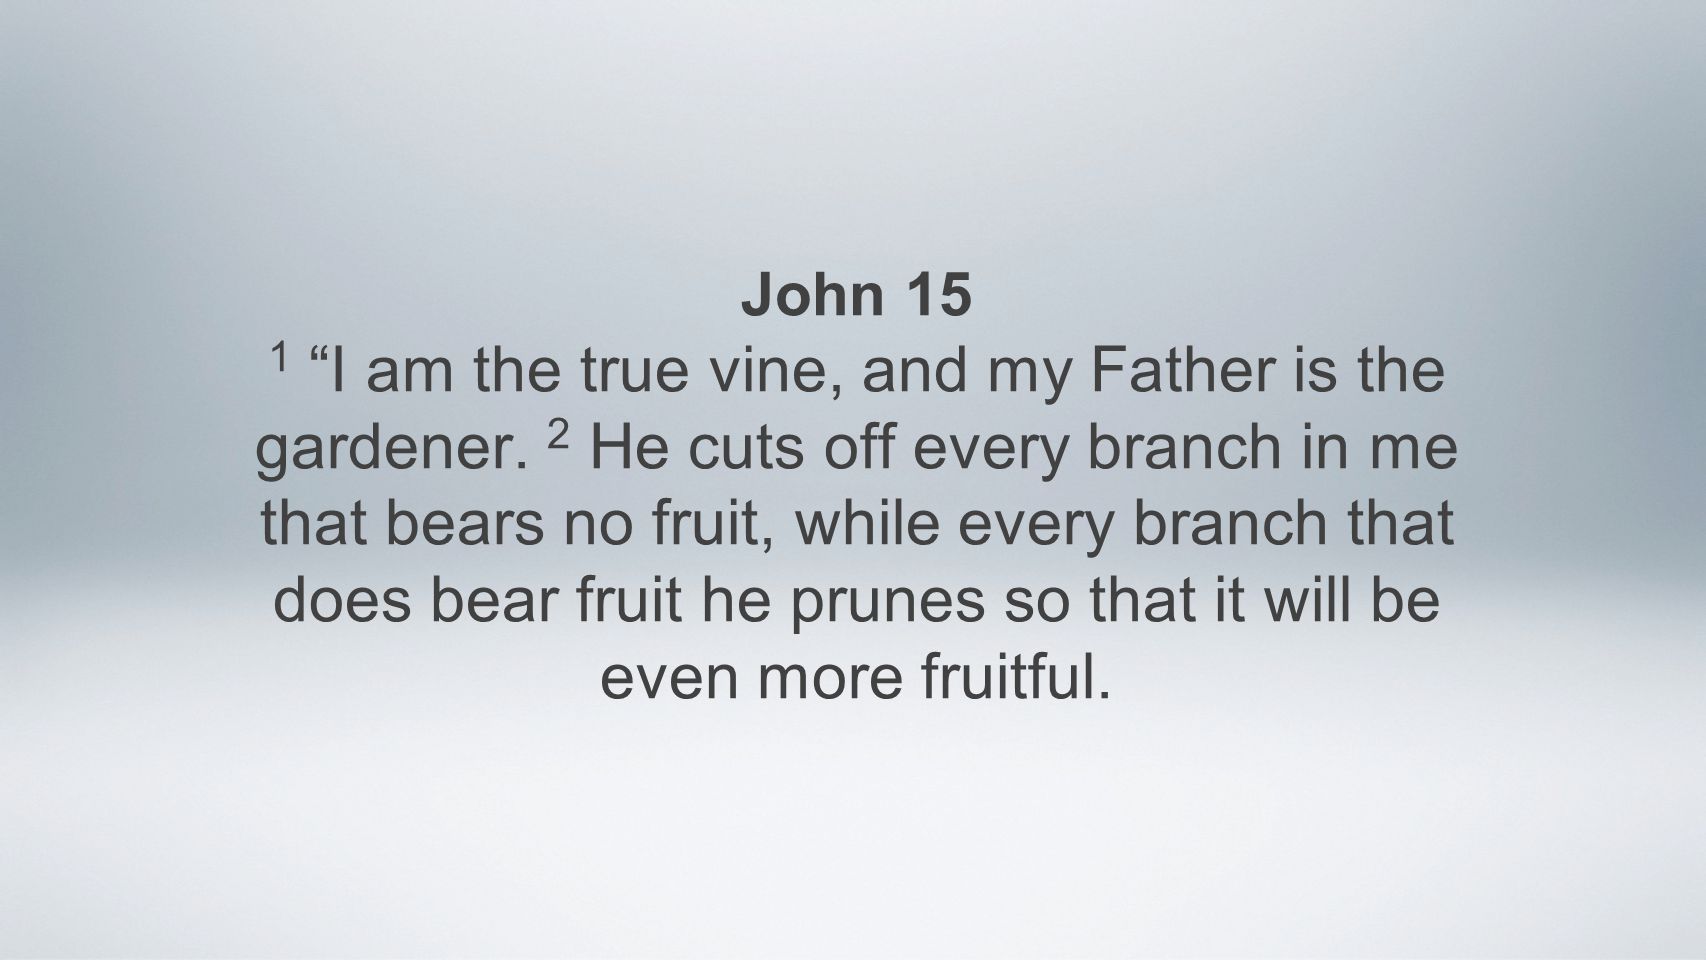 John 15 1 I am the true vine, and my Father is the gardener.